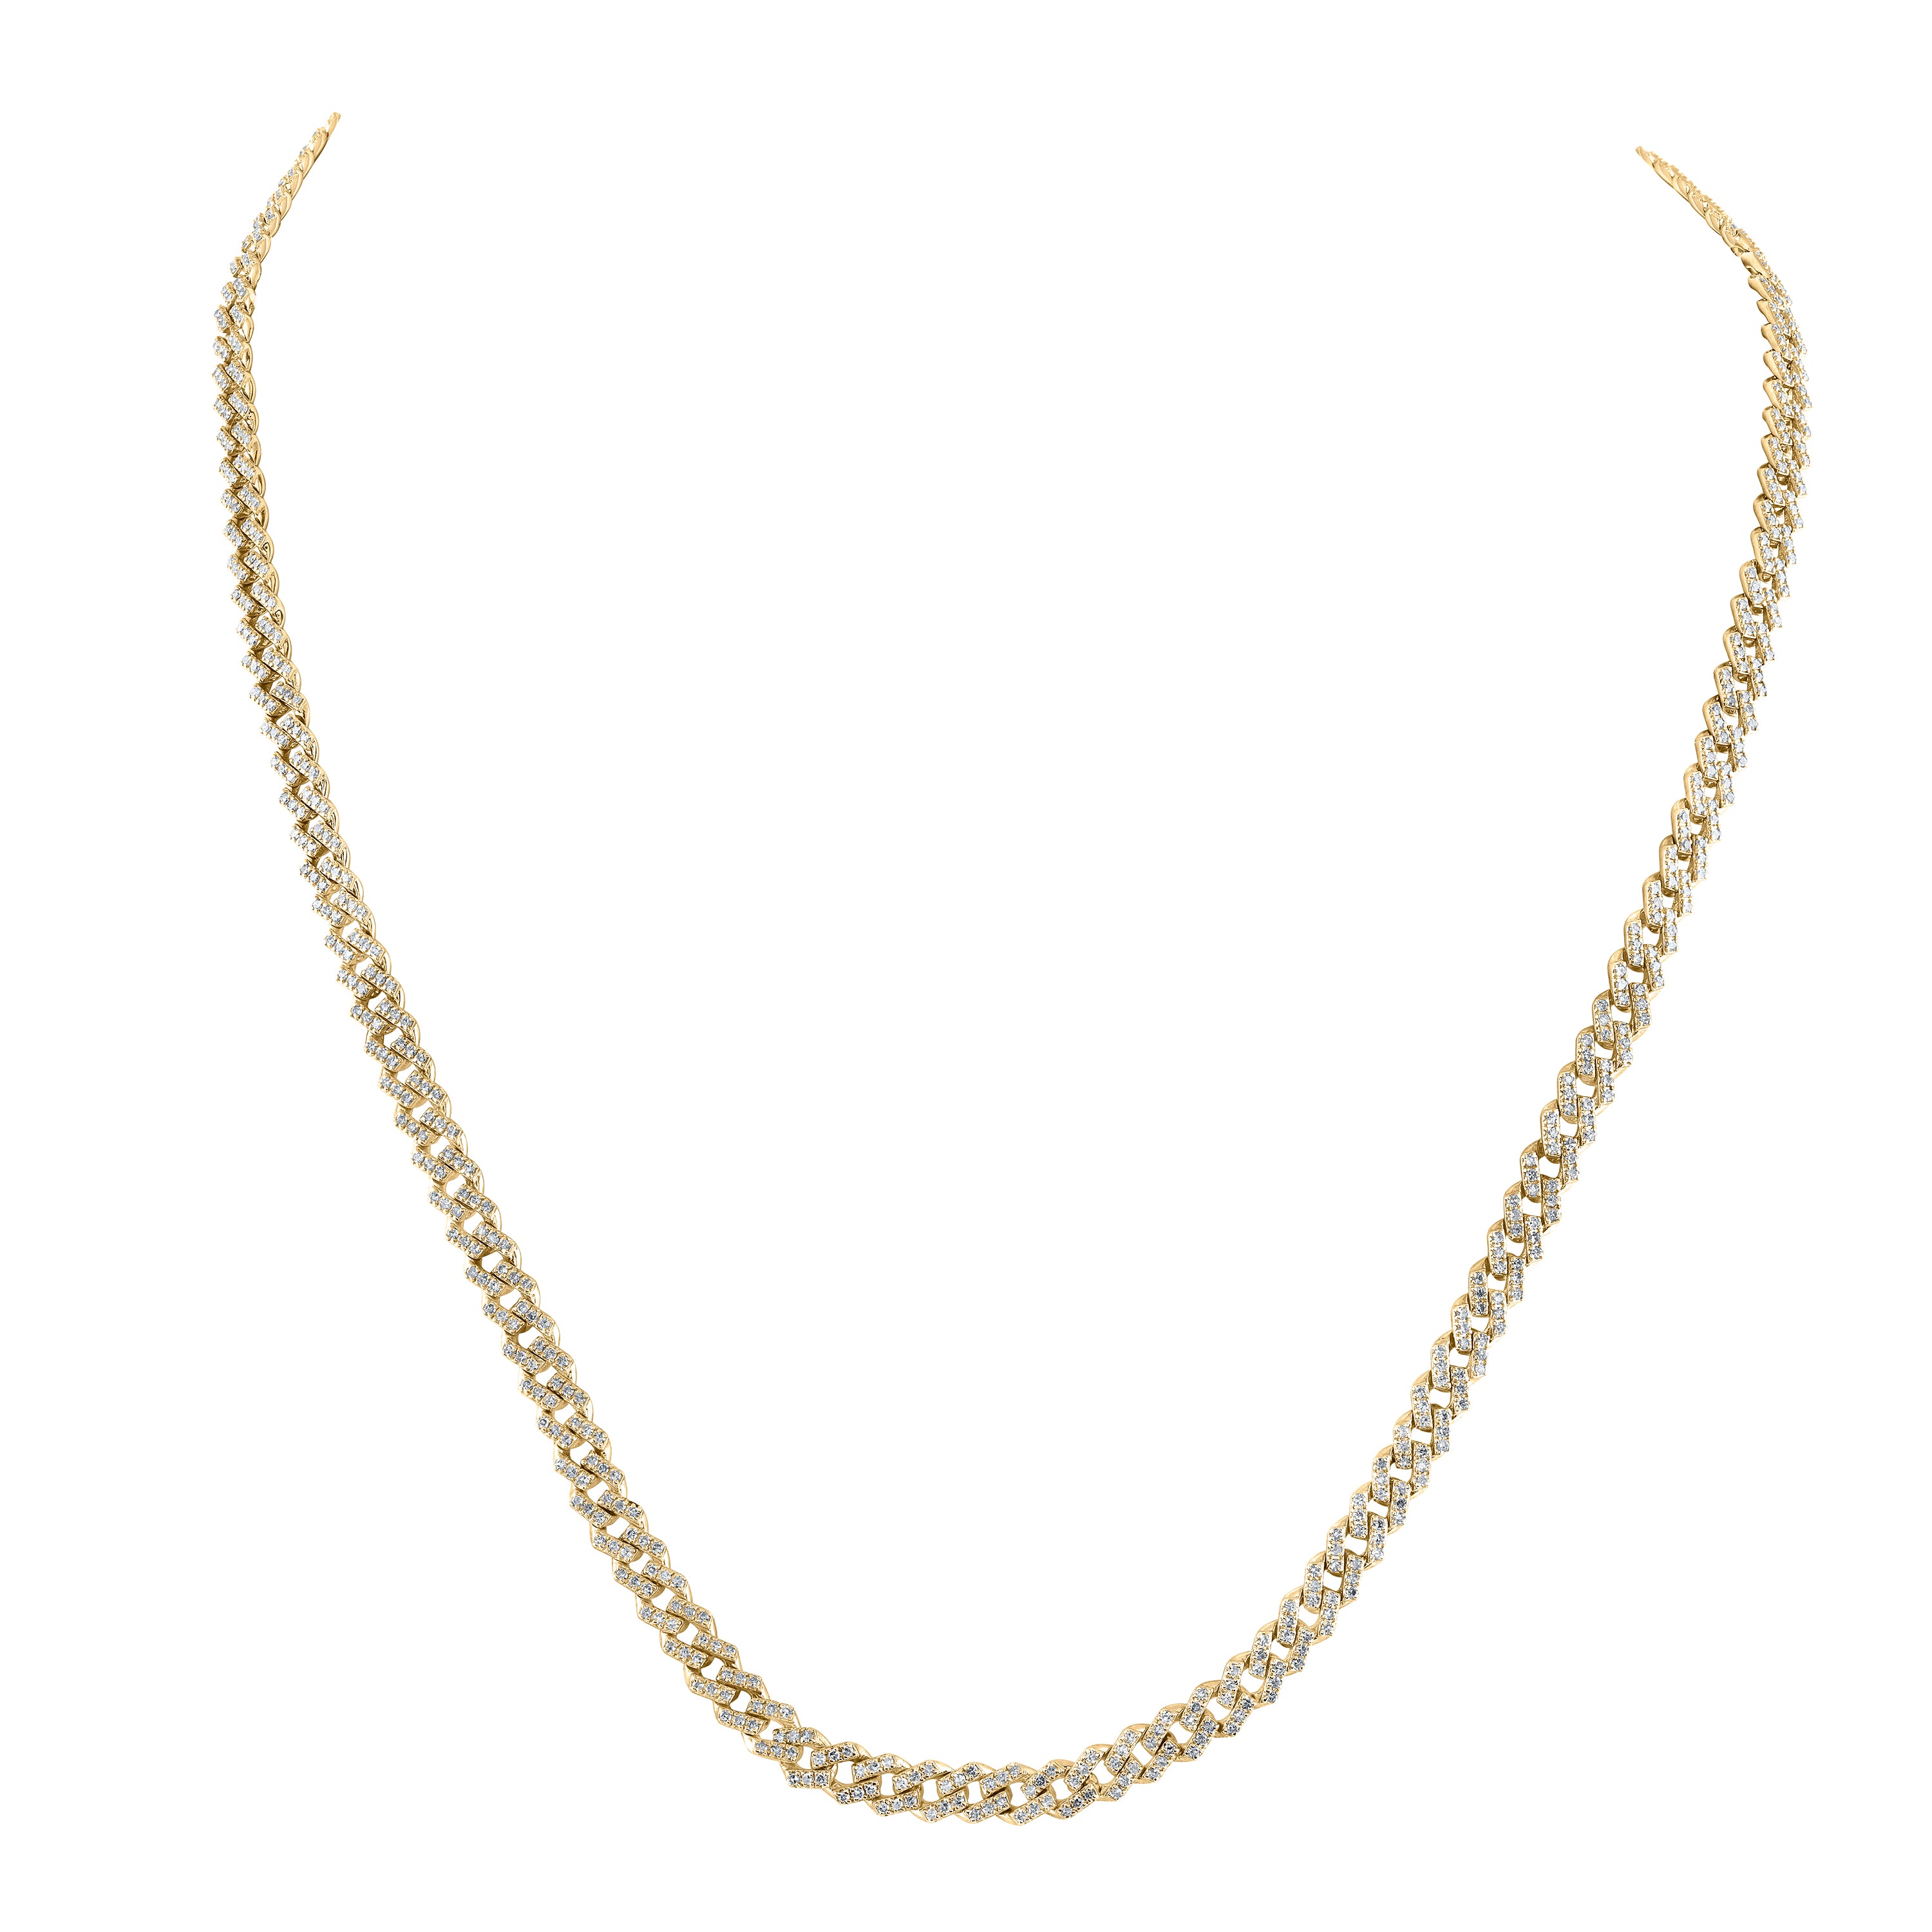 10Kt Yellow Gold 4 1/5Ctw-Dia Nk (5Mm) Mens Chain (22 Inch)